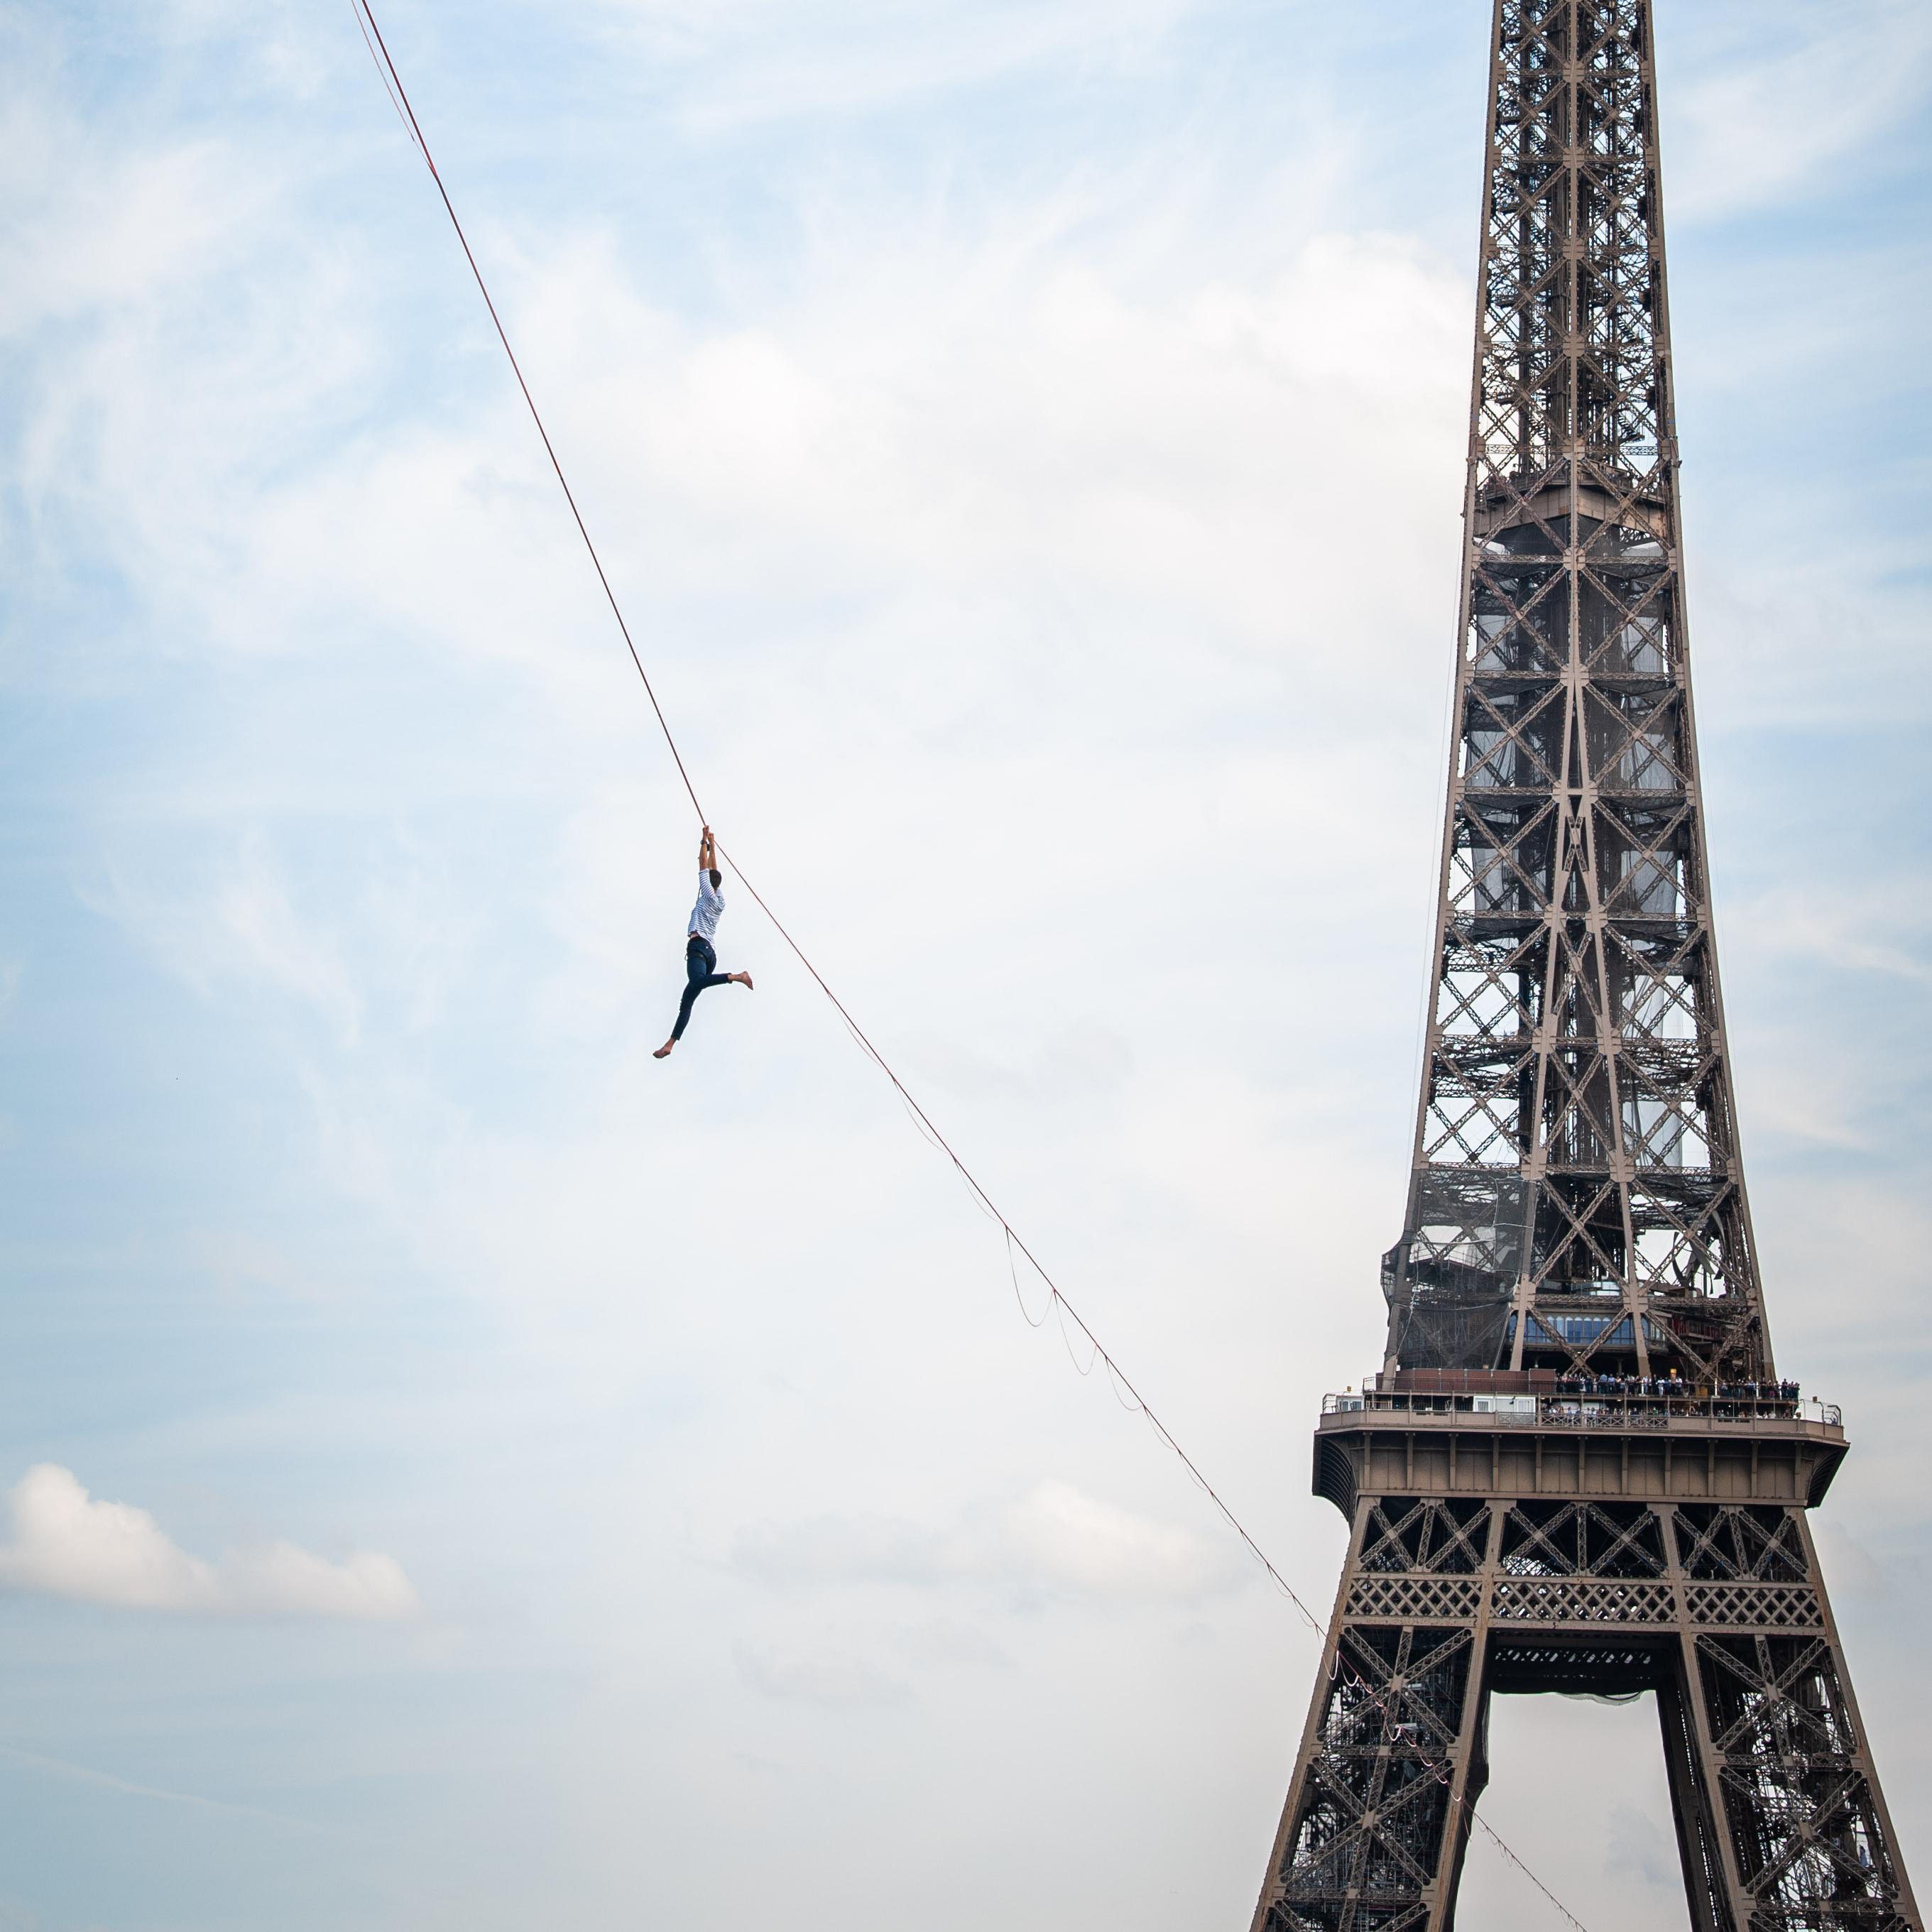 A tightrope walker hanging on a tightrope, next to the Eiffel Tower